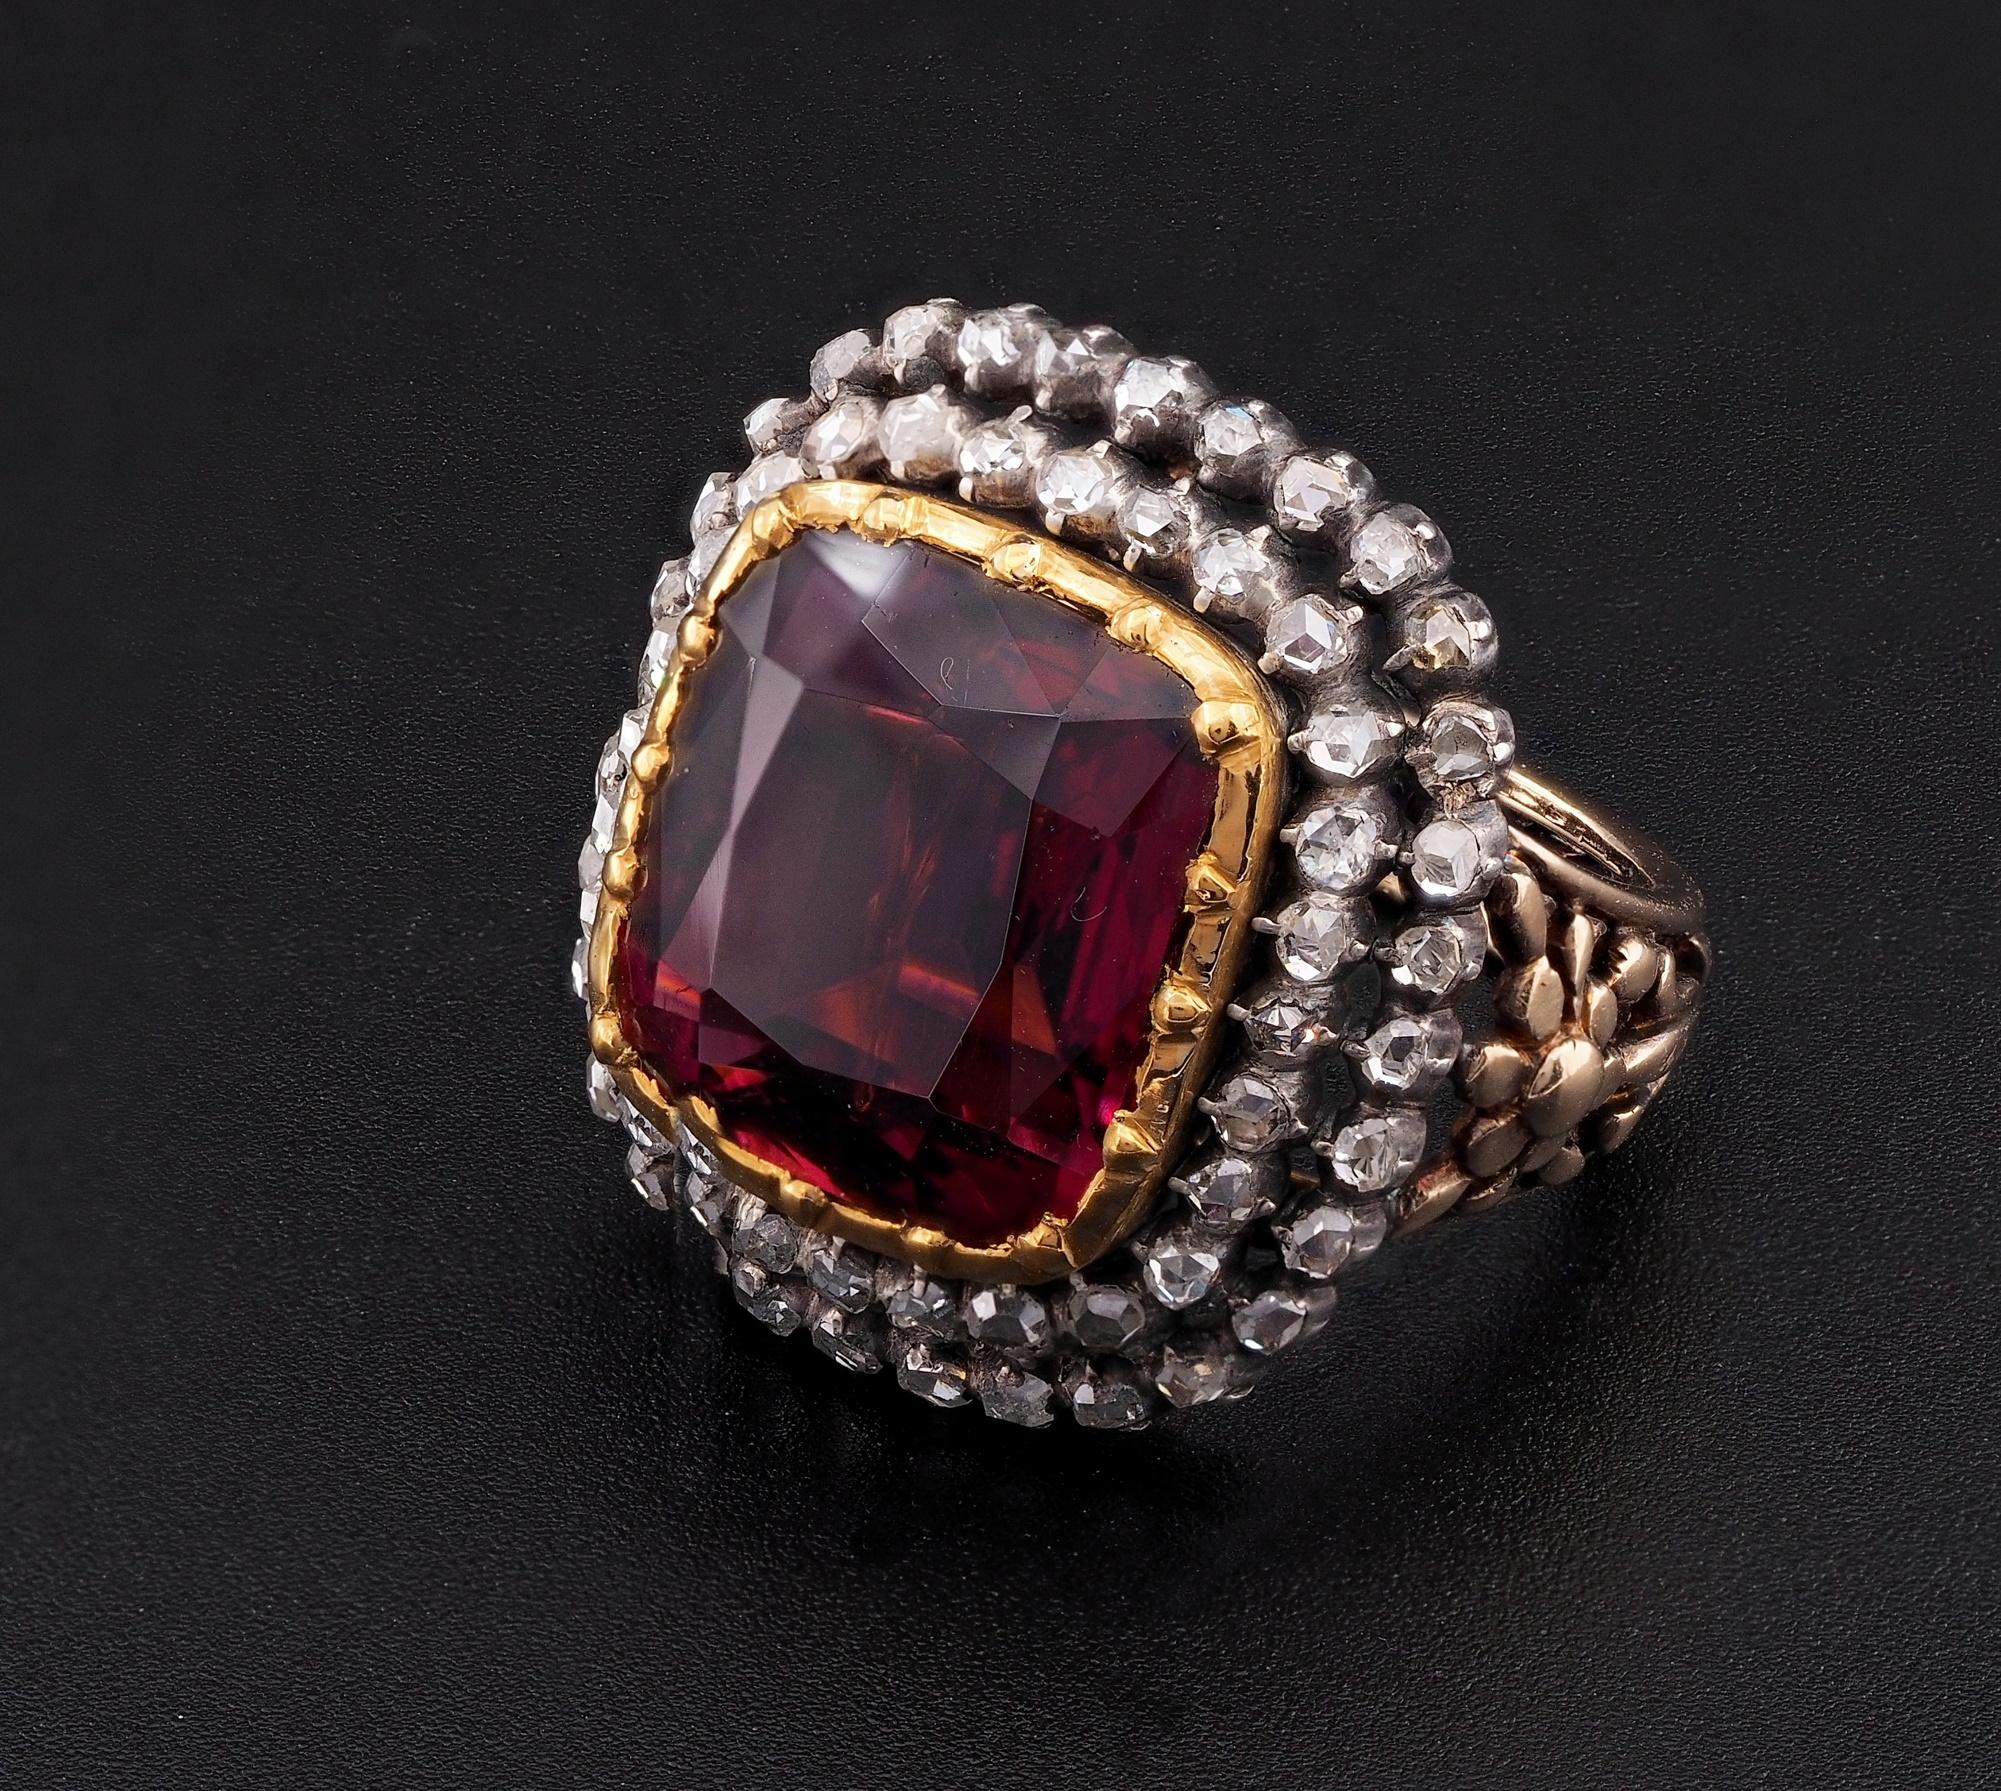 Victorian 10.95 CT Untreated Magenta Rubellite or Red Tourmaline Diamond Ring For Sale 3